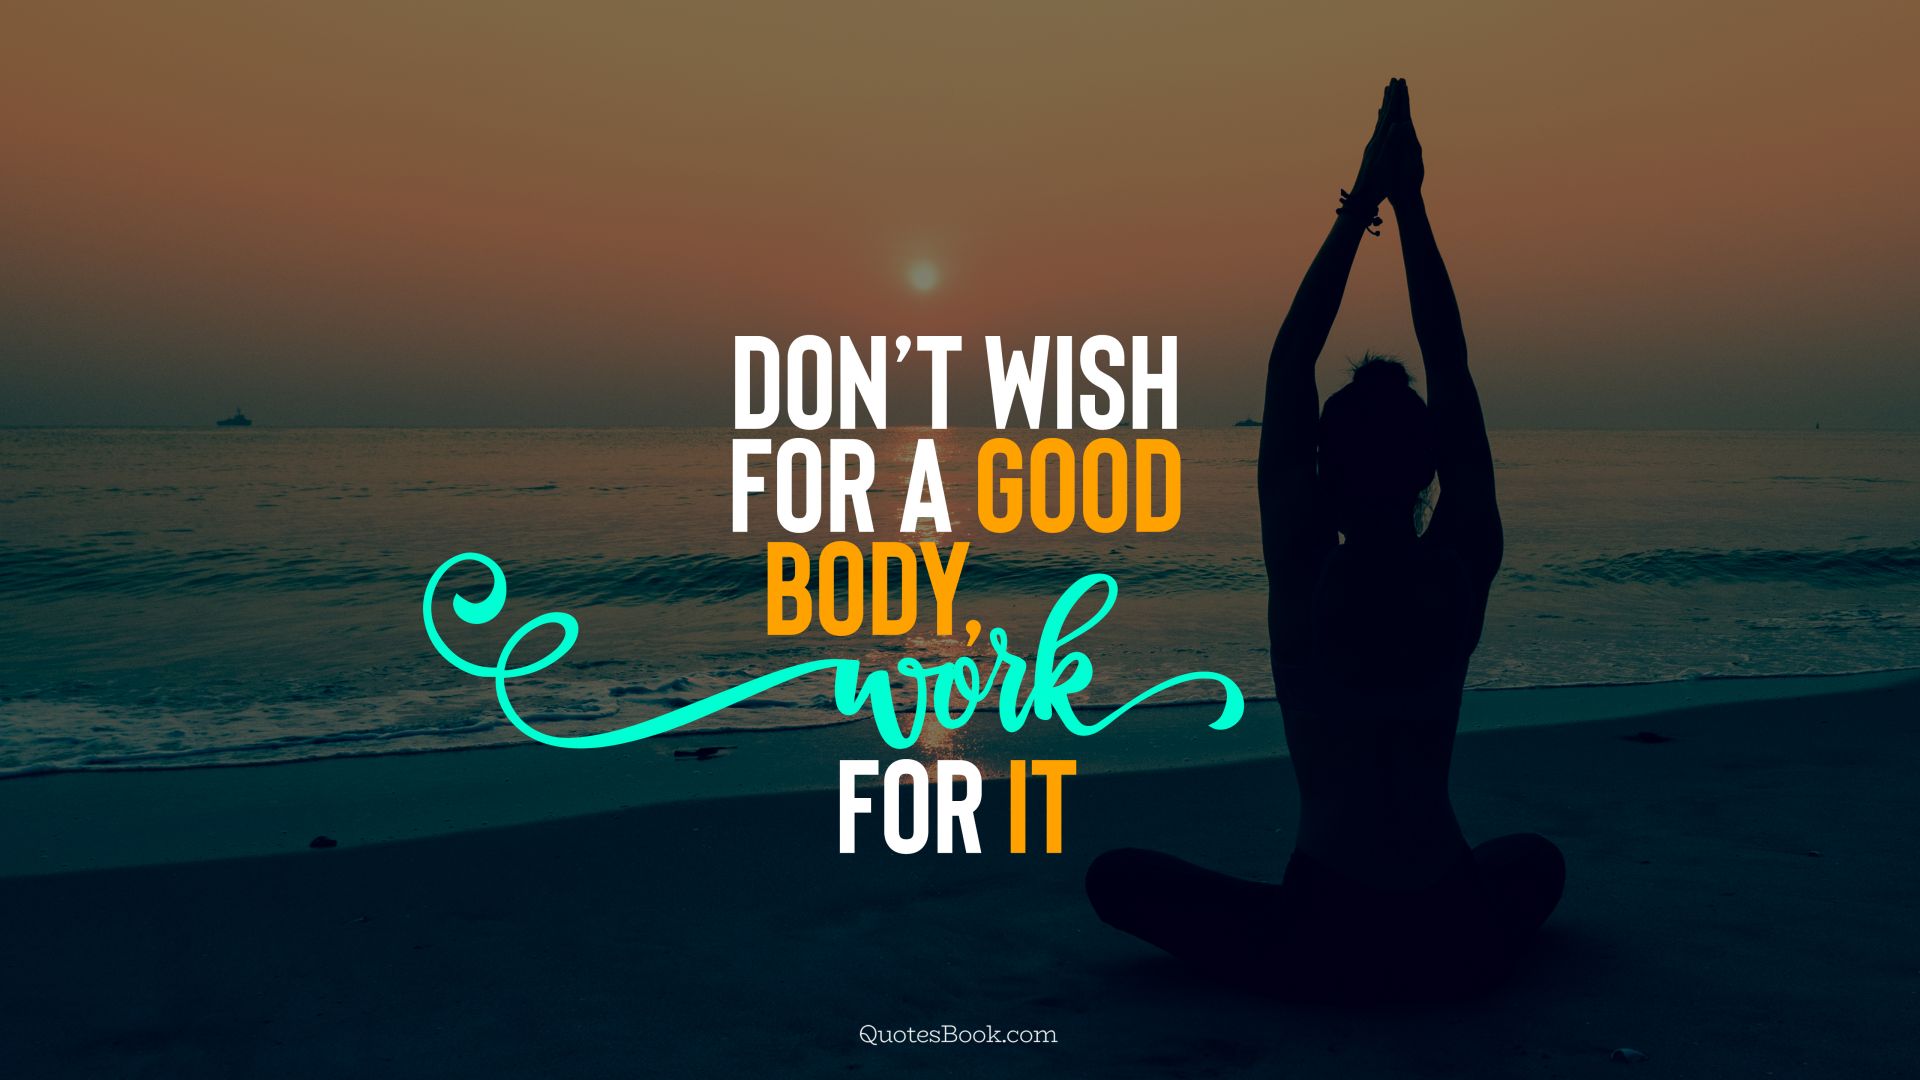 Don’t wish for a good body, work for it